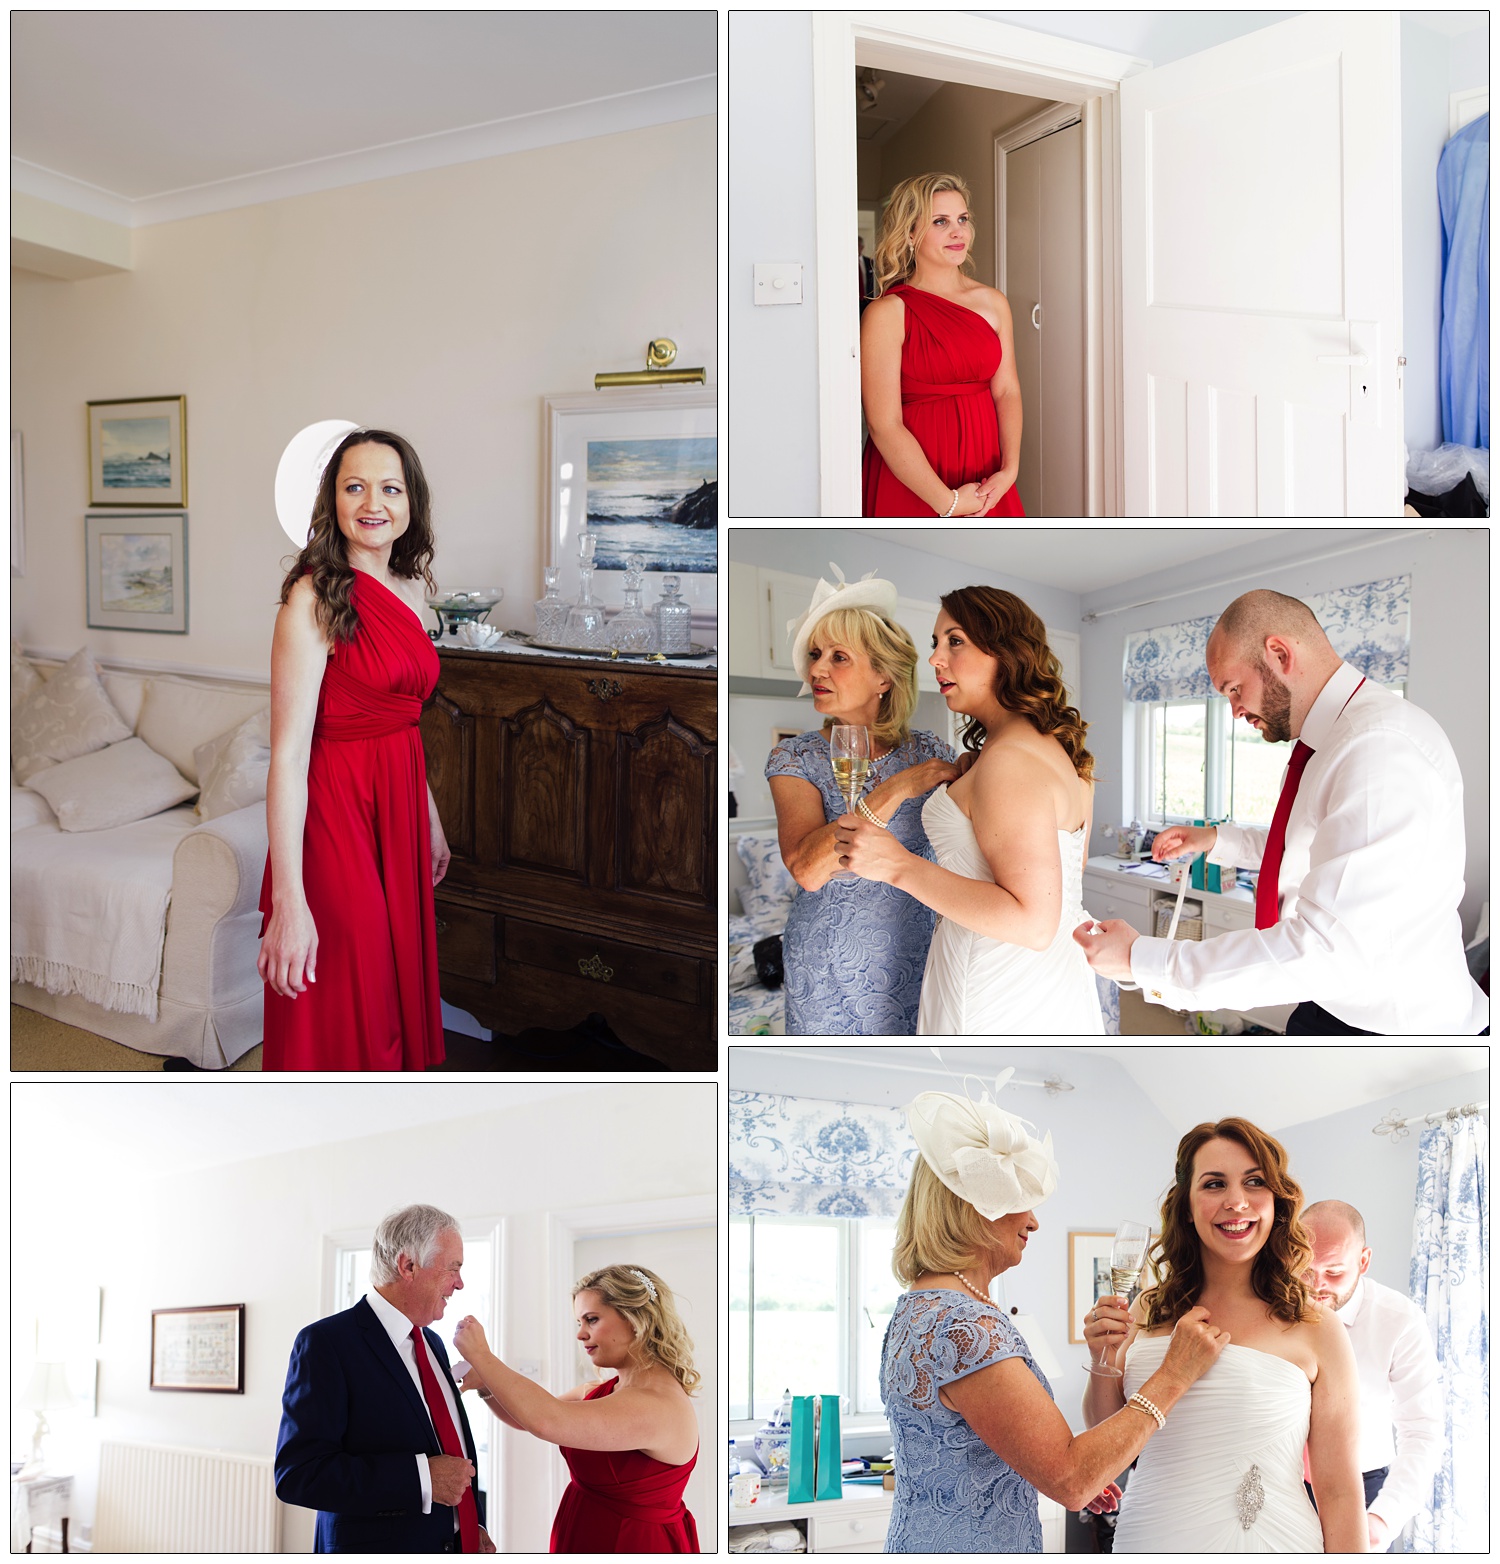 Bridesmaids in red dresses and the bride in white, are getting ready at home with her family.